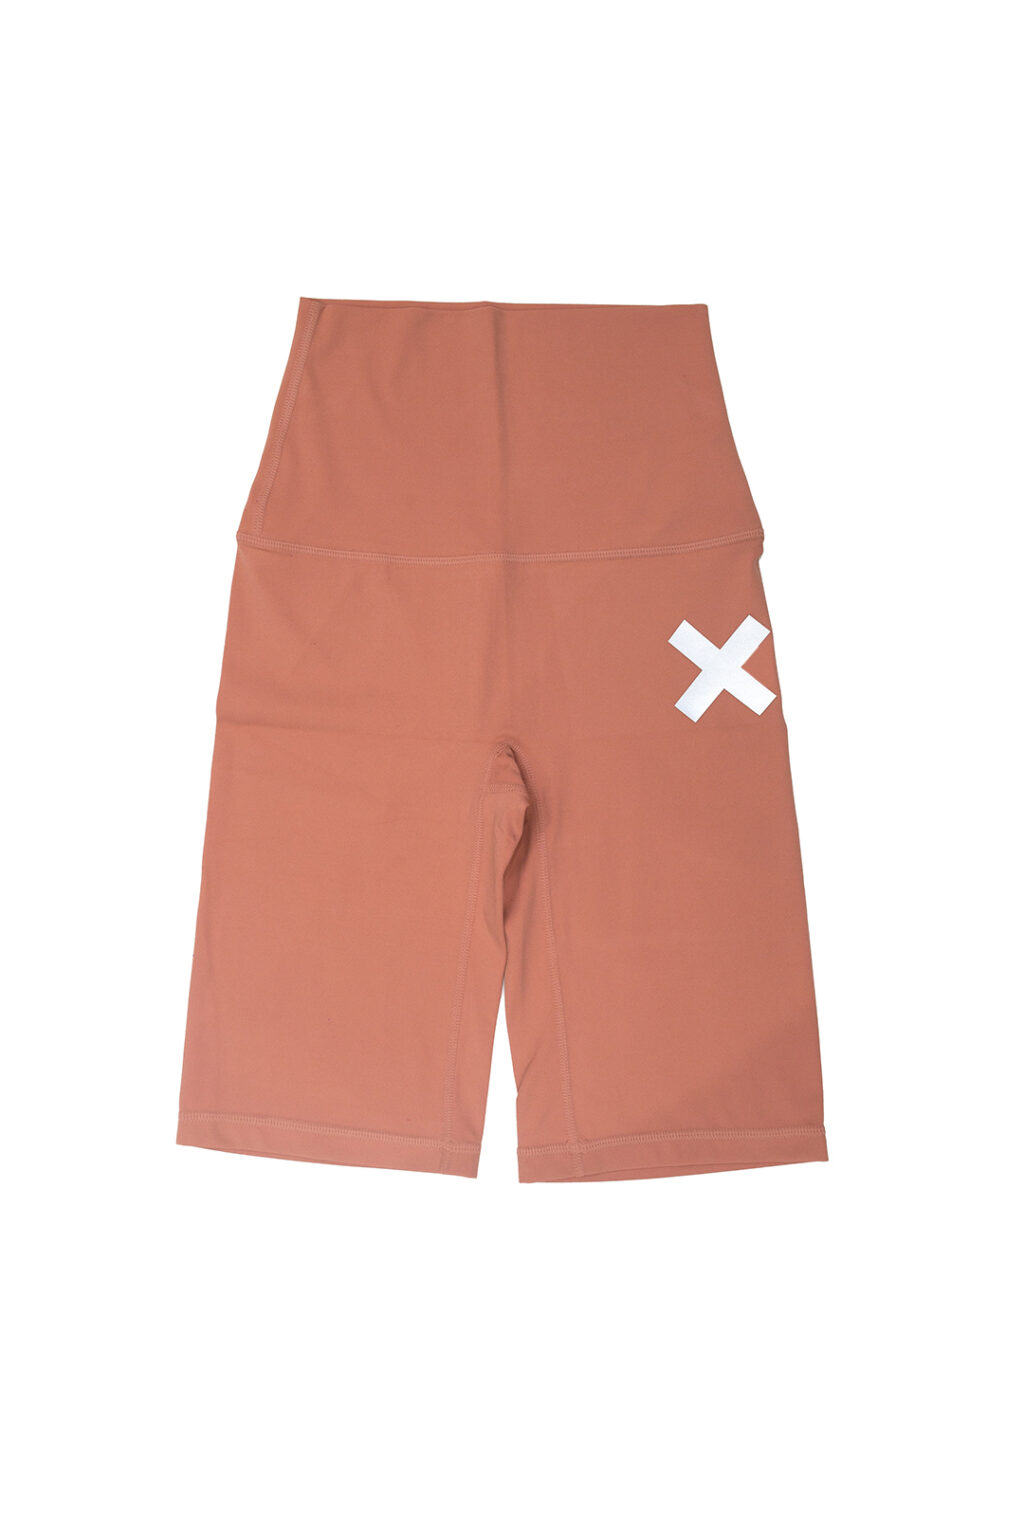 Time Out X Bike Shorts – Coral – Front